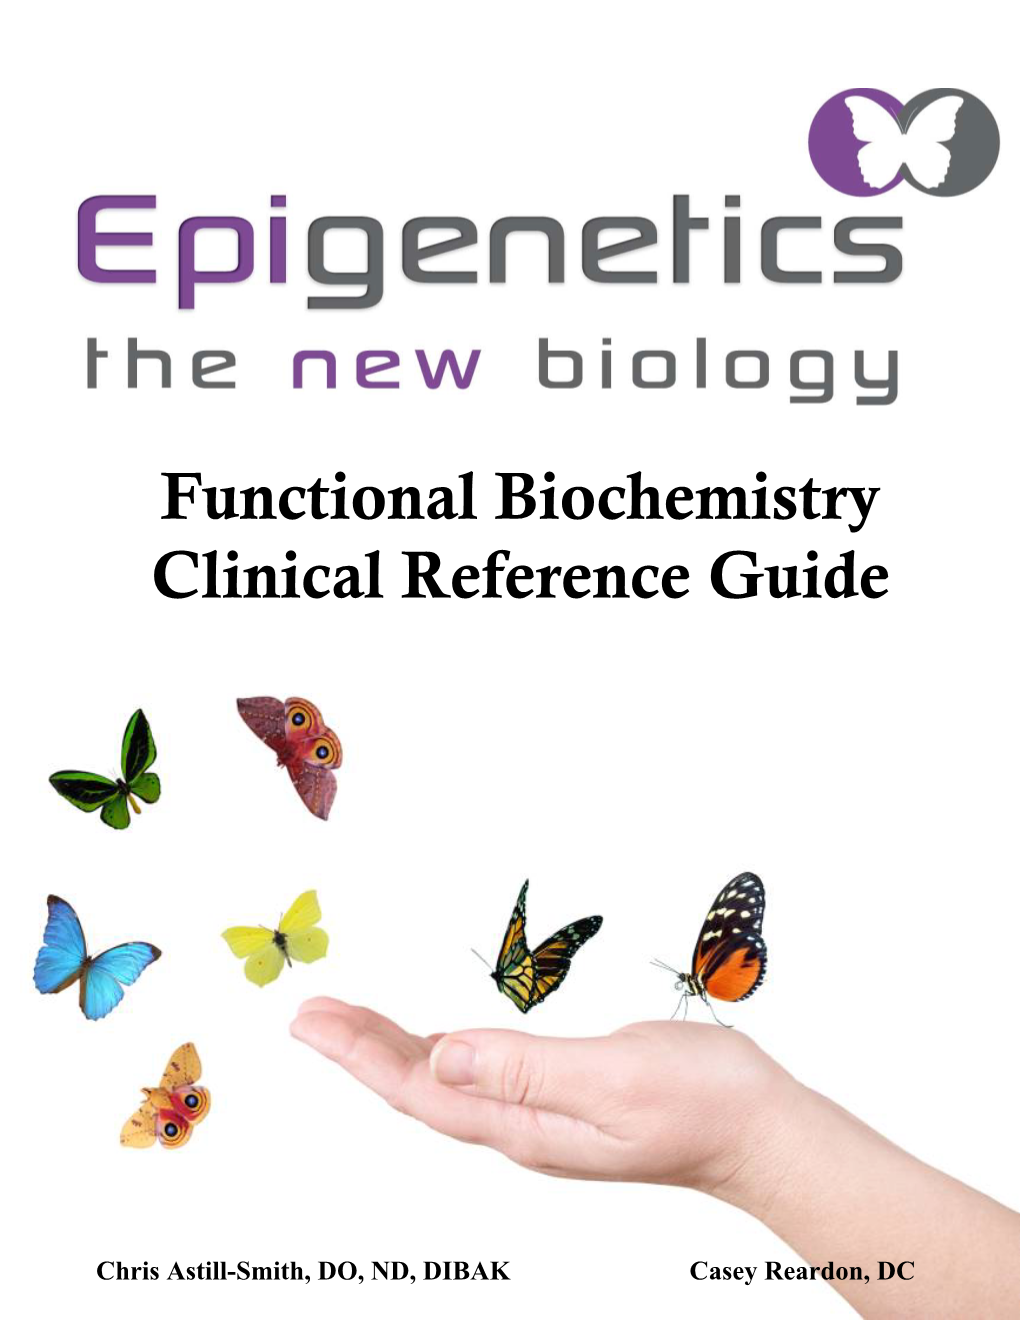 Functional Biochemistry Clinical Reference Guide